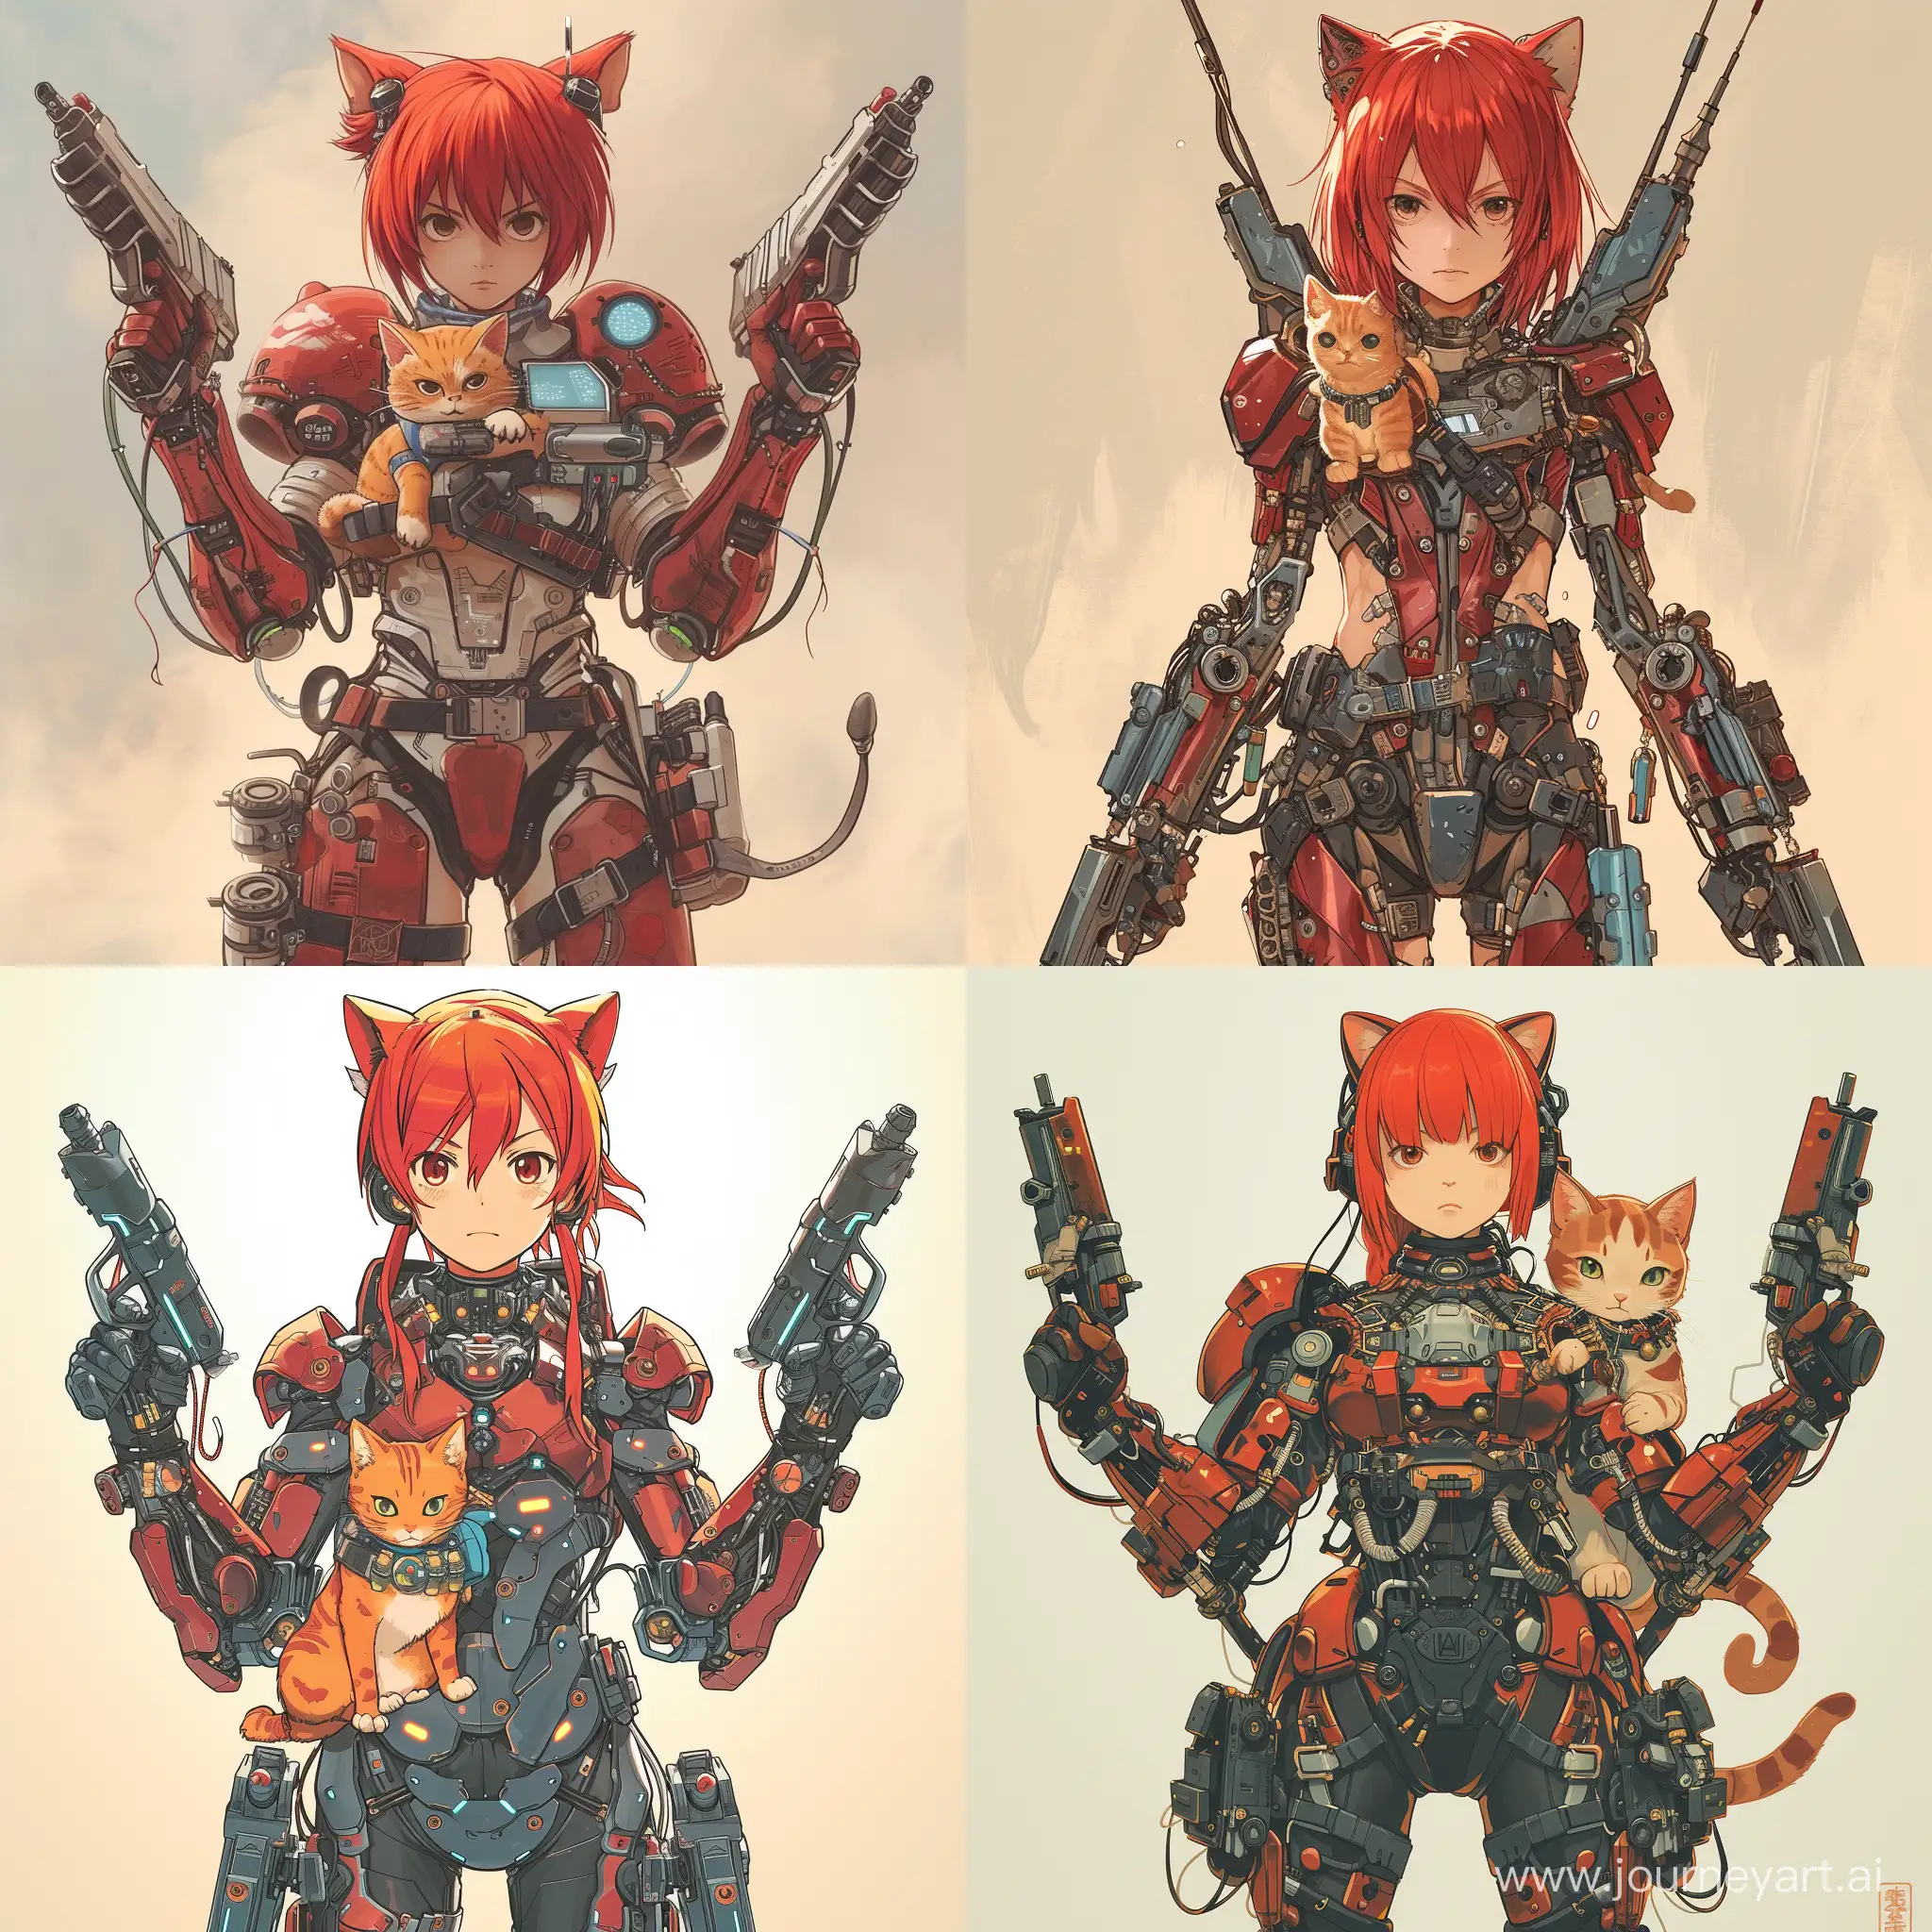 Futuristic-RedHaired-Girl-in-Bionic-Armor-with-AnimeStyle-Pistols-and-Anthromorphic-Cat